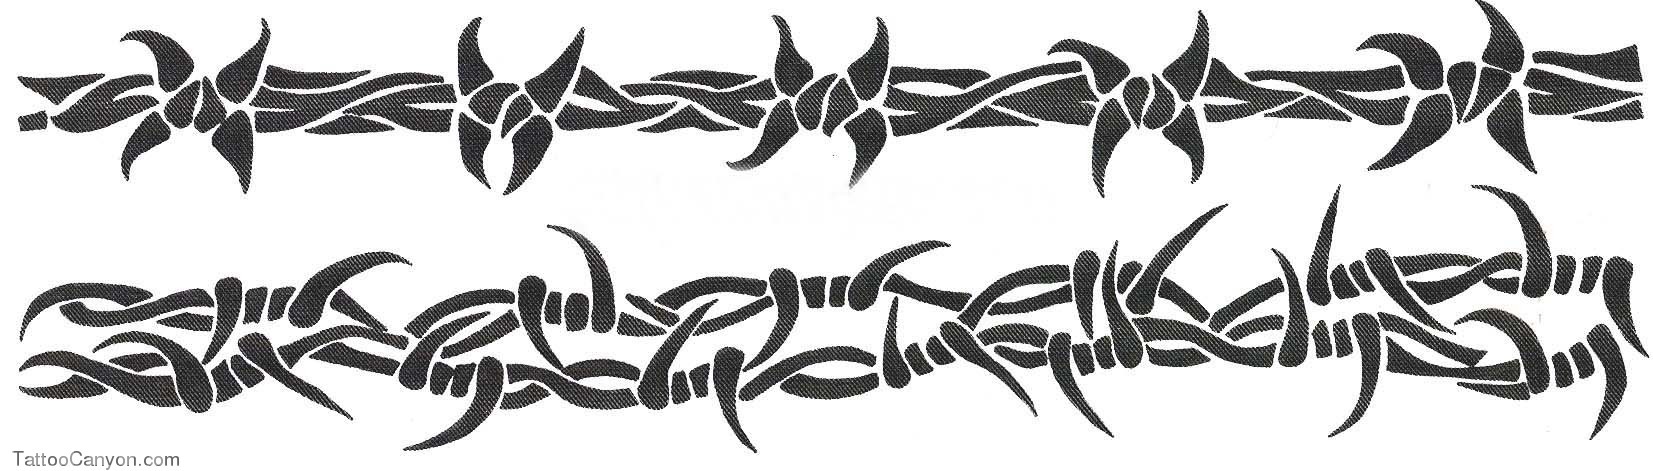 18 Barbed Wire Tattoo Images Designs And Ideas